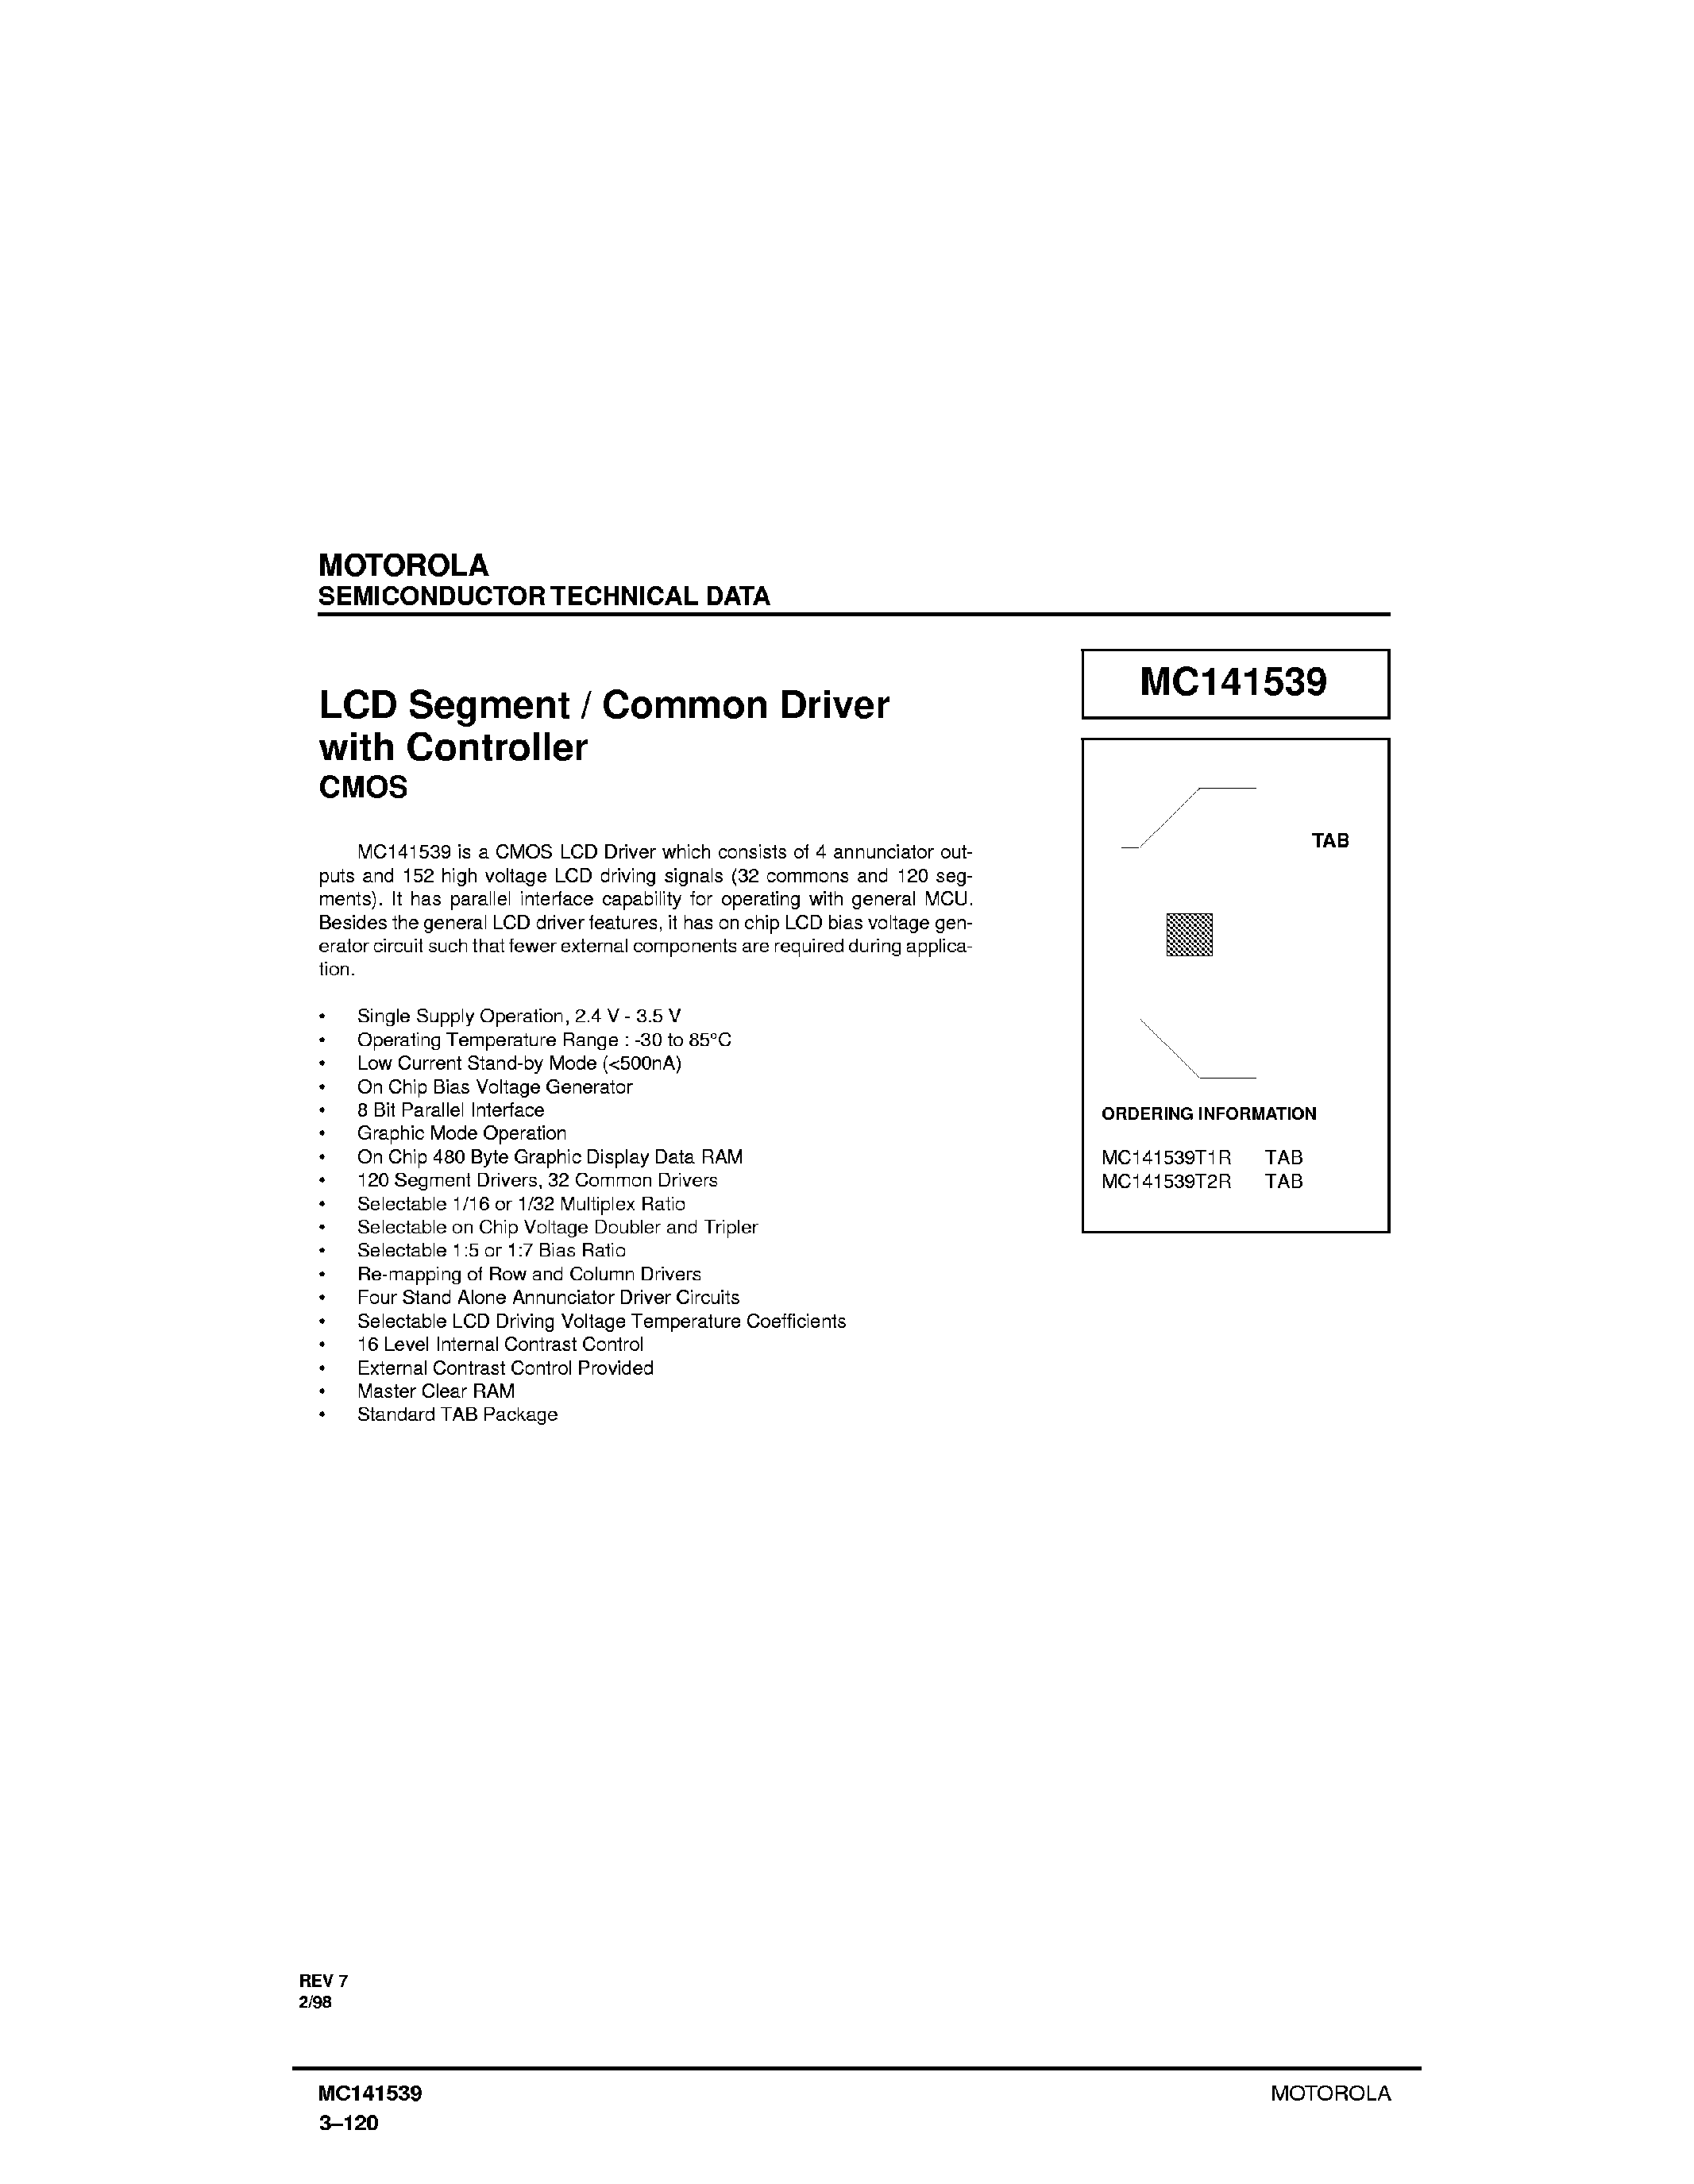 Datasheet MC141539T2R - LCD Segment / Common Driver with Controller CMOS page 1